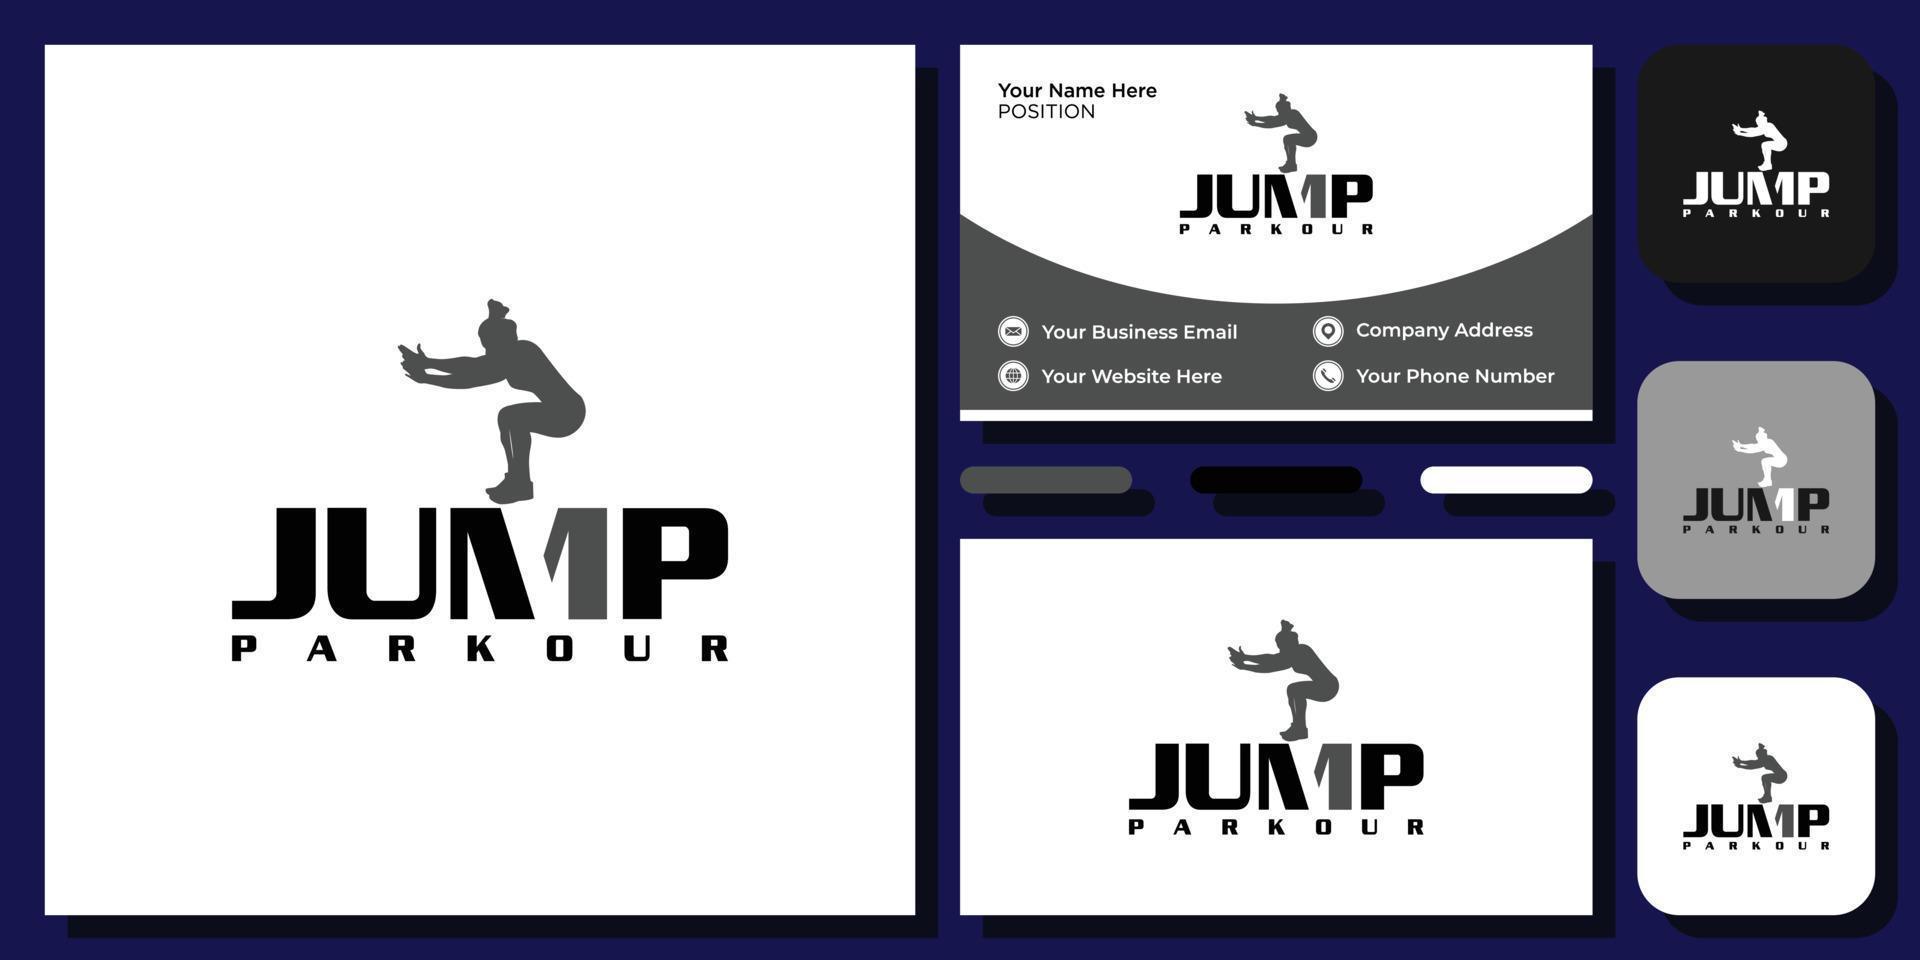 Jump Parkour typography action sport expert urban street challenge with business card template vector